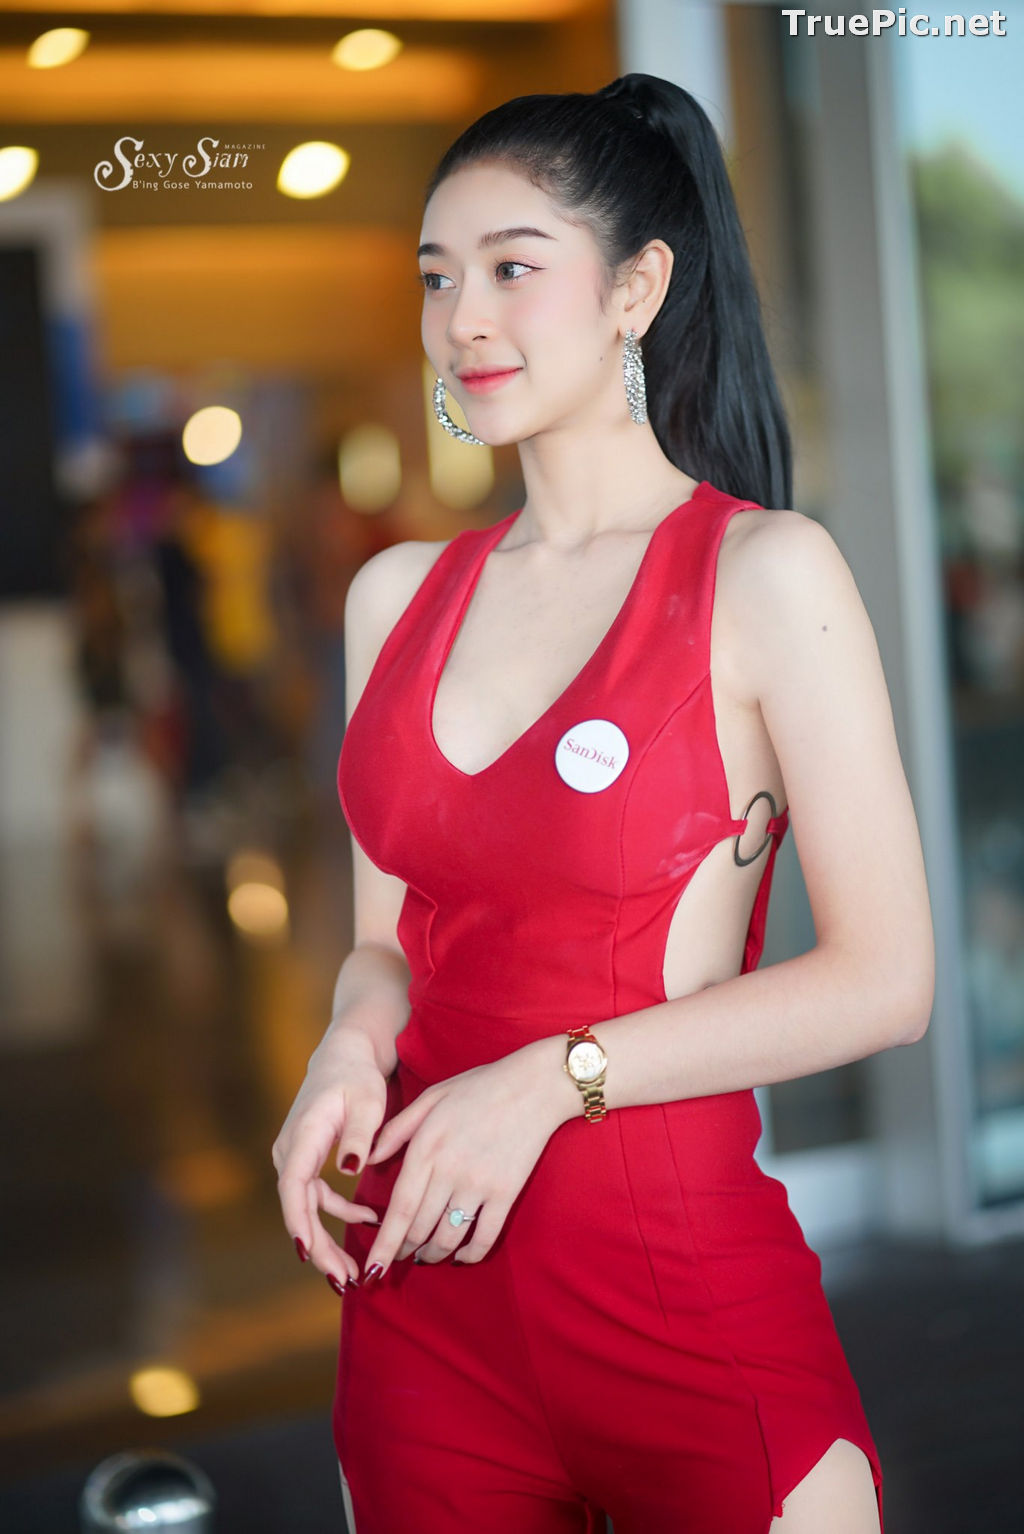 Image Thailand Model - วรารัตน์ มงคลทรง - From Red To Heart - TruePic.net - Picture-14